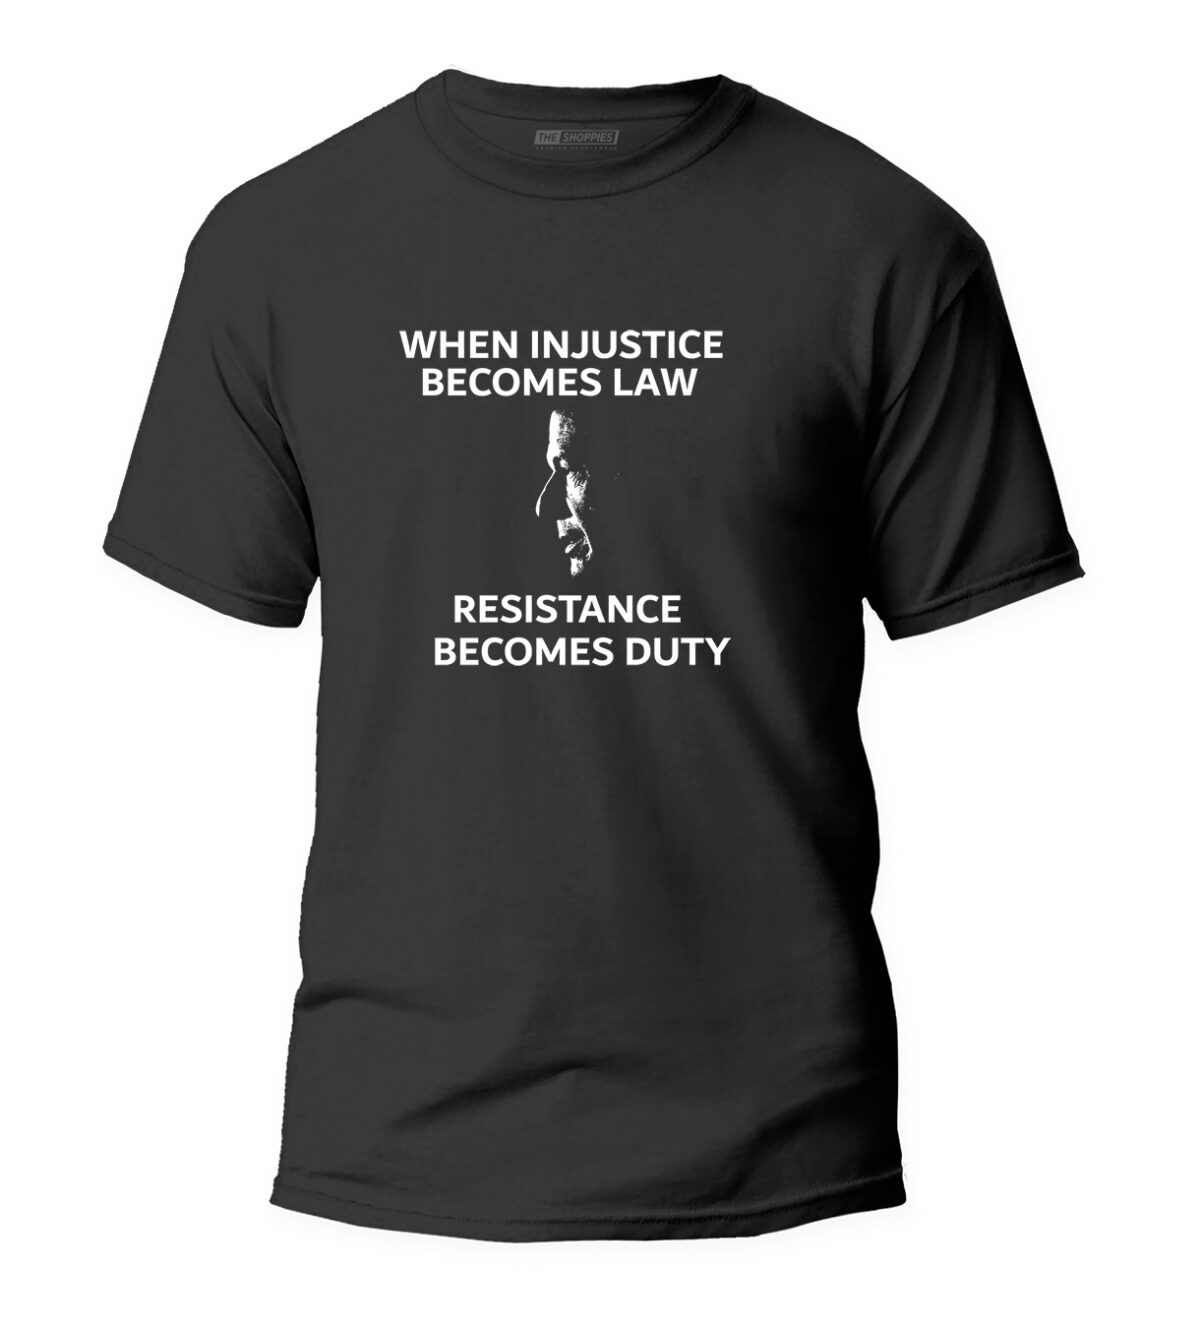 When Injustice Becomes Law - Black T-shirt